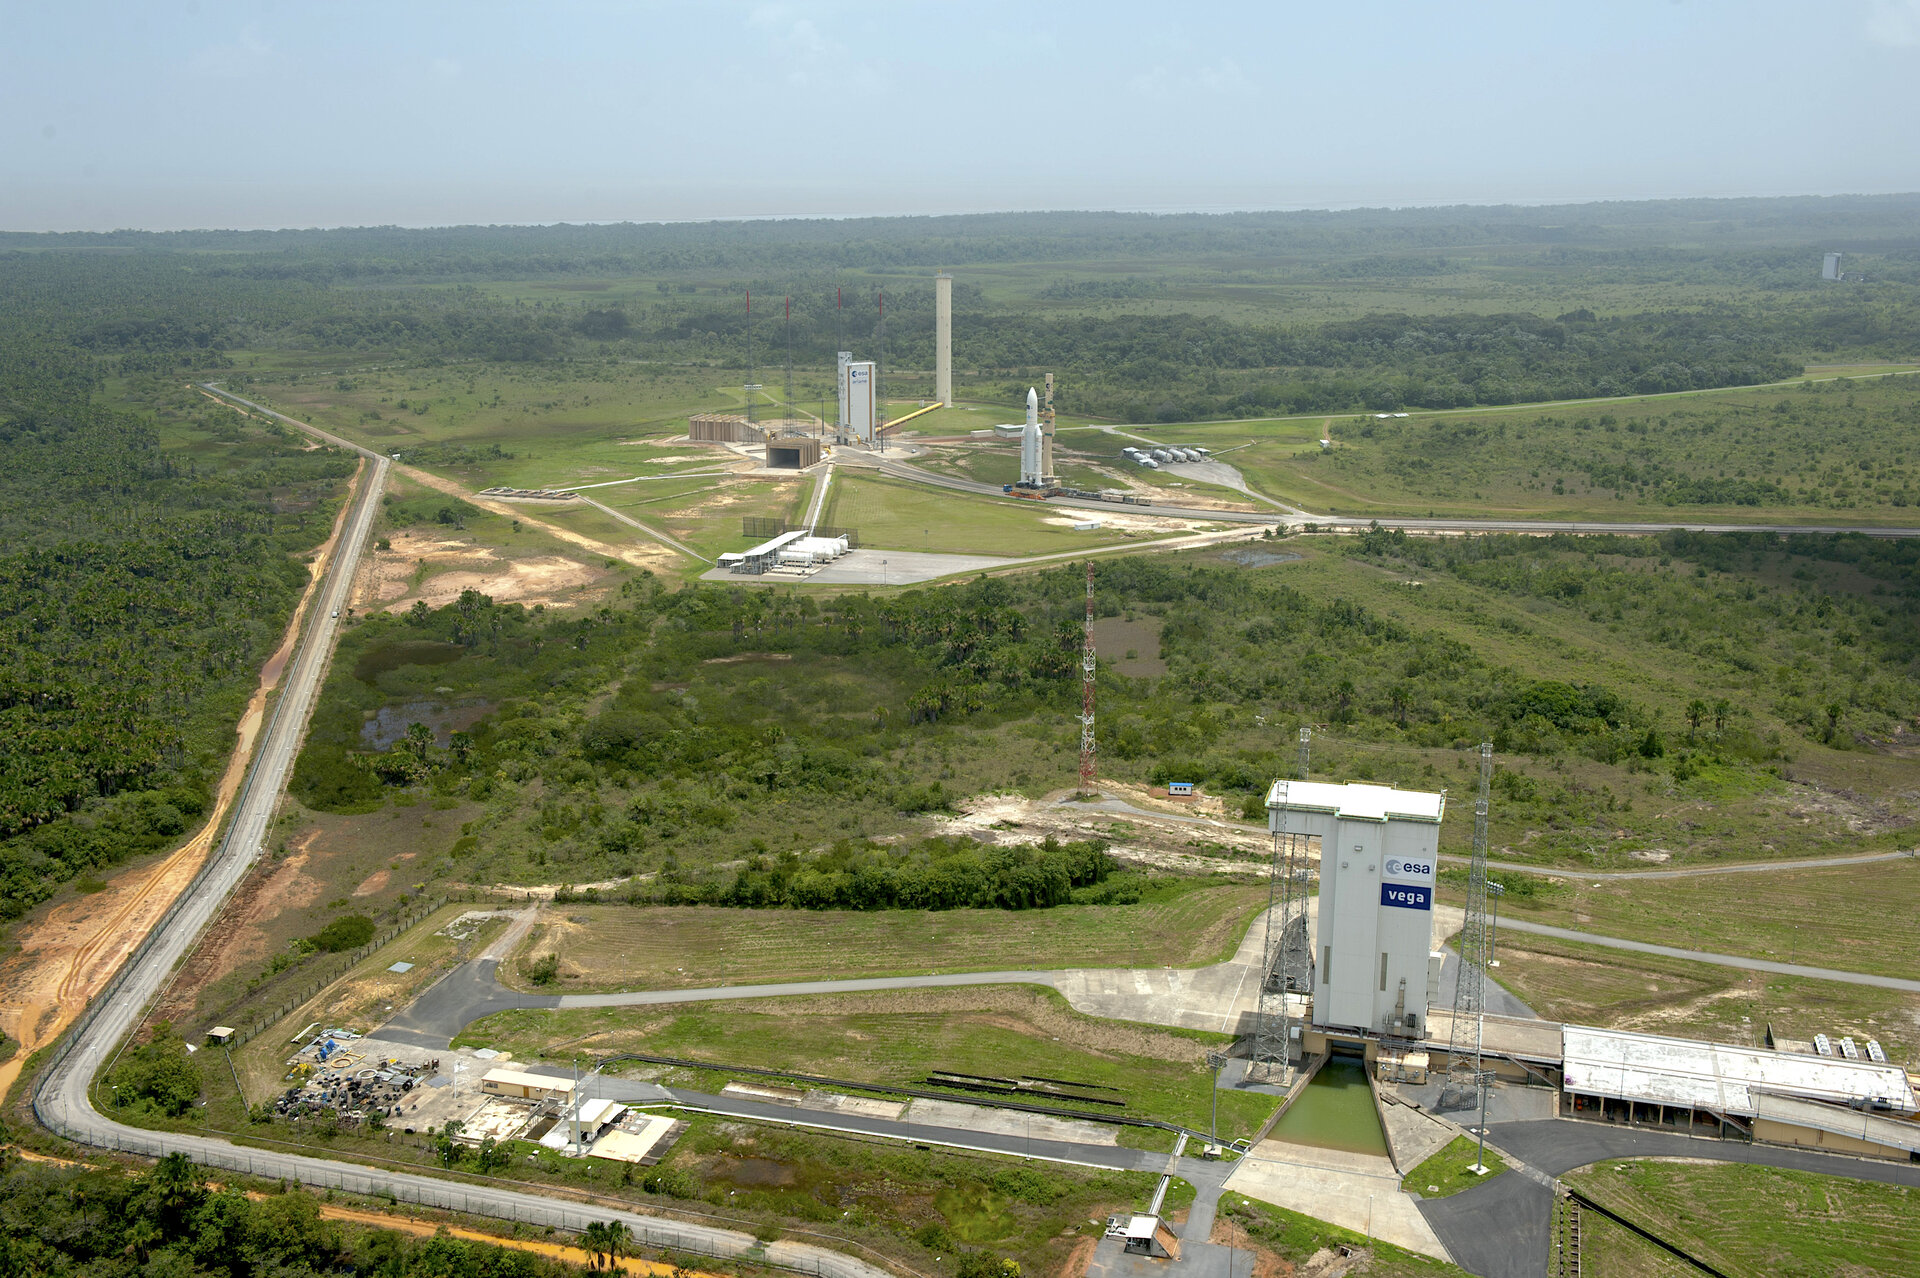 Vega and Ariane 5 launch pads at Europe's Spaceport